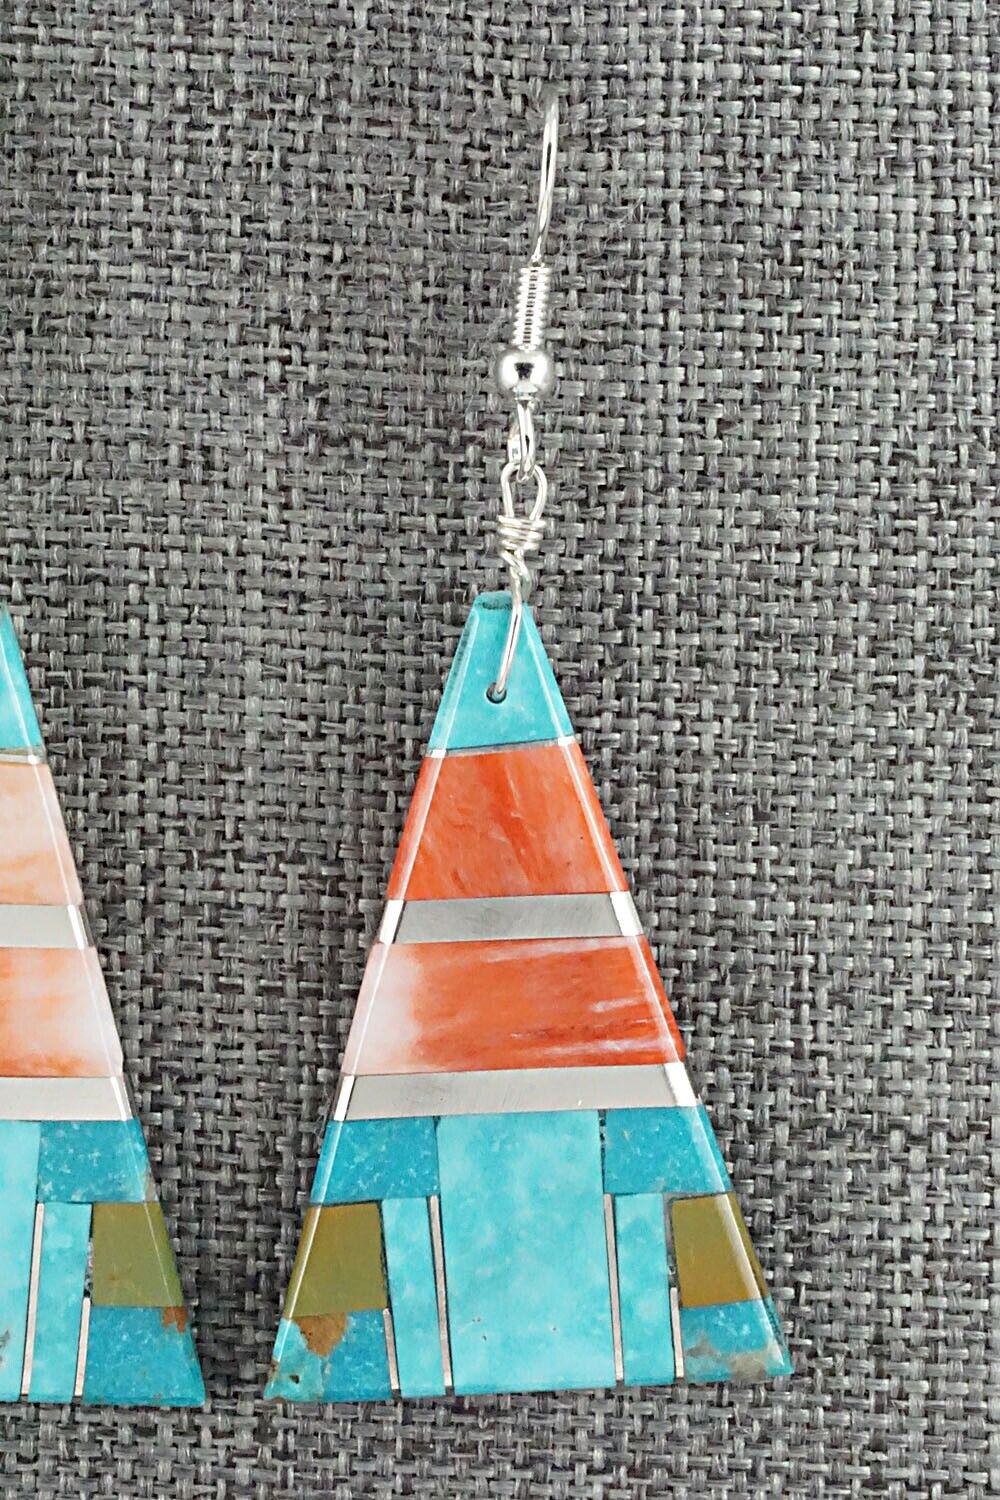 Turquoise, Spiny Oyster & Sterling Silver Inlay Earrings - Daniel Coriz